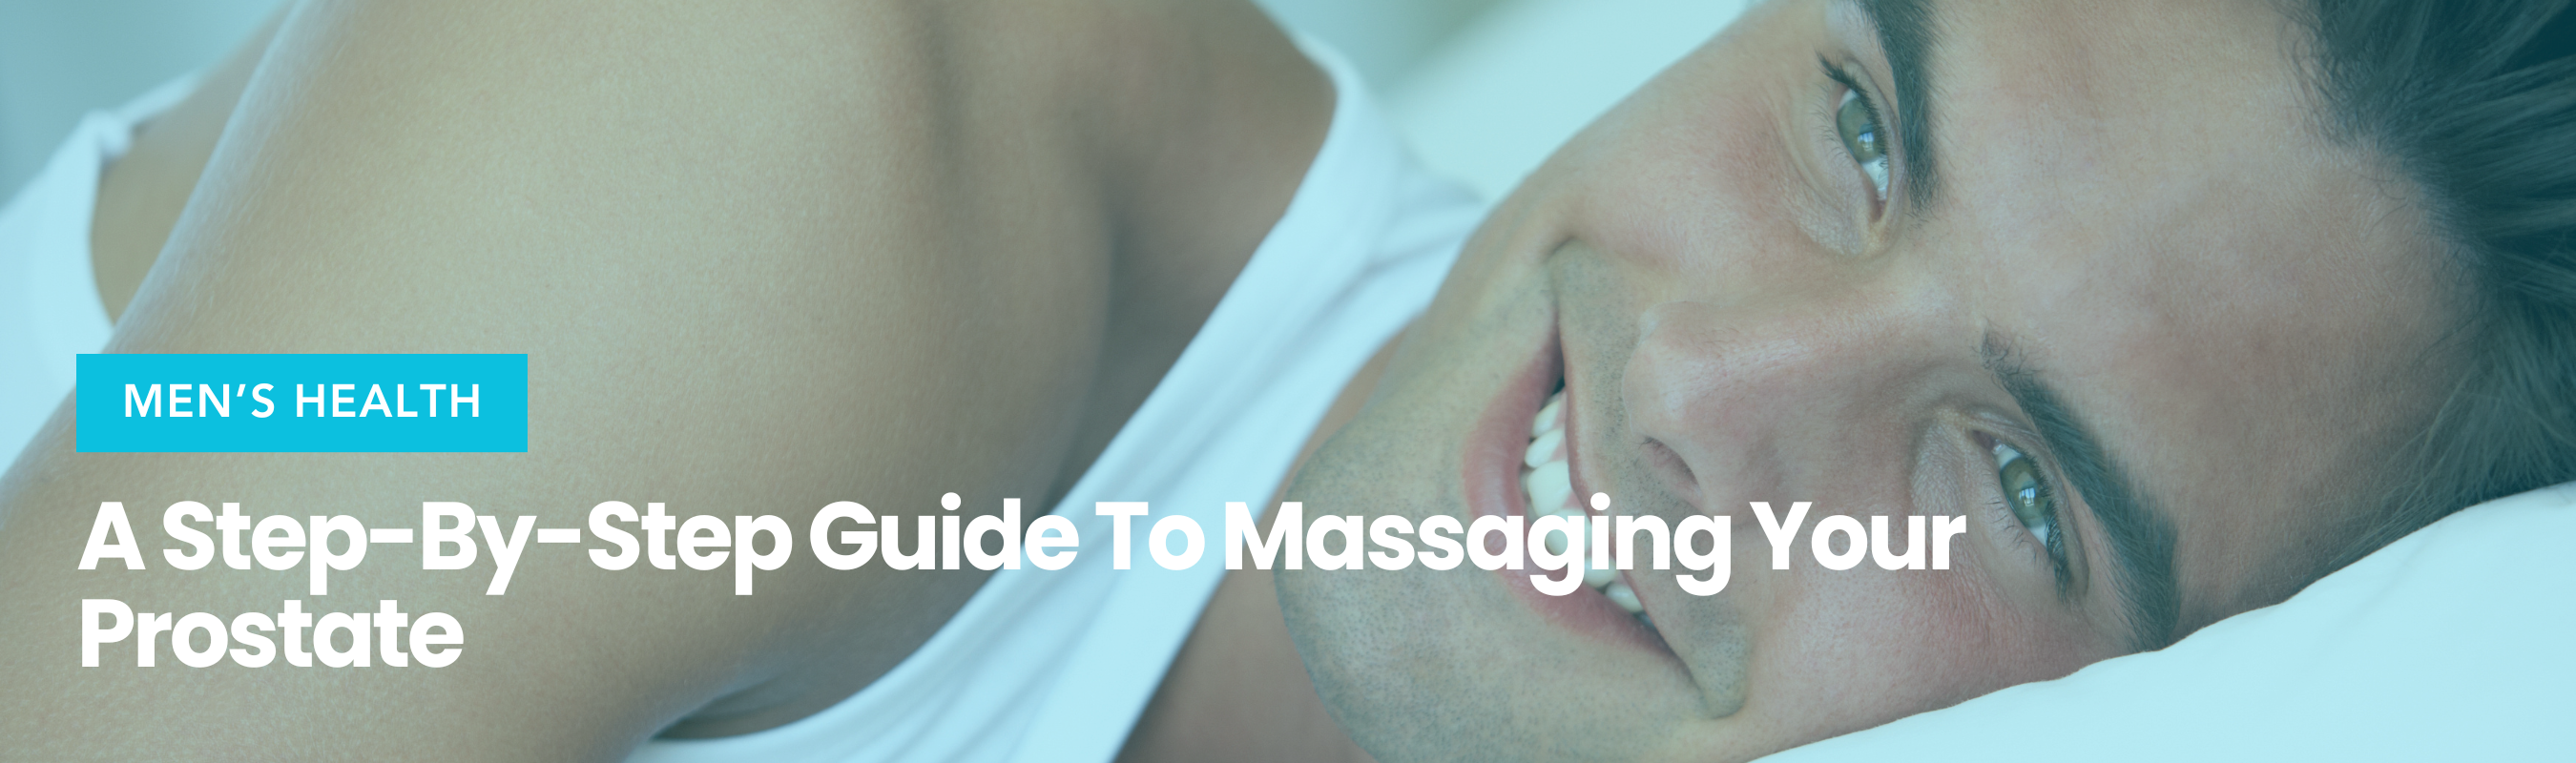 A Step-By-Step Guide To Massaging Your Prostate